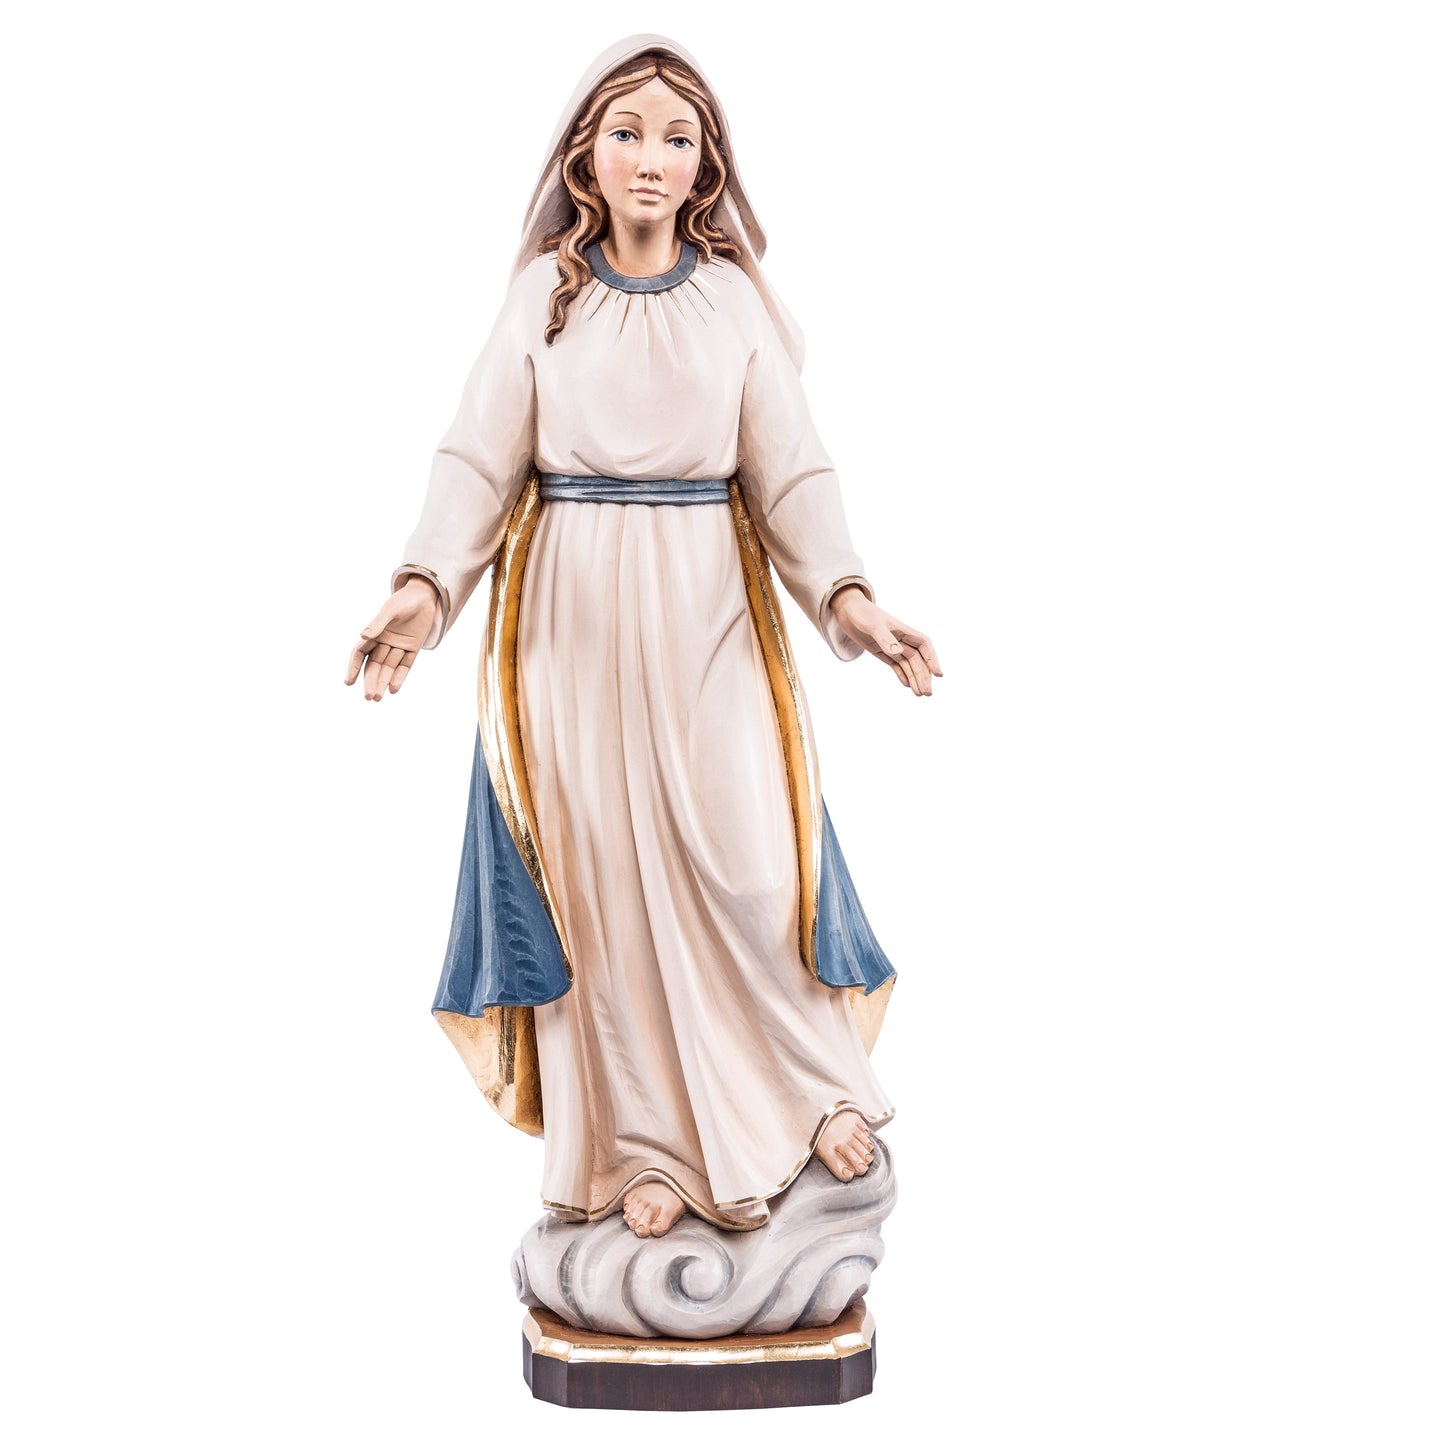 MONDO CATTOLICO Colored / 10 cm (3.9 in) Wooden statue of Our Lady of Grace